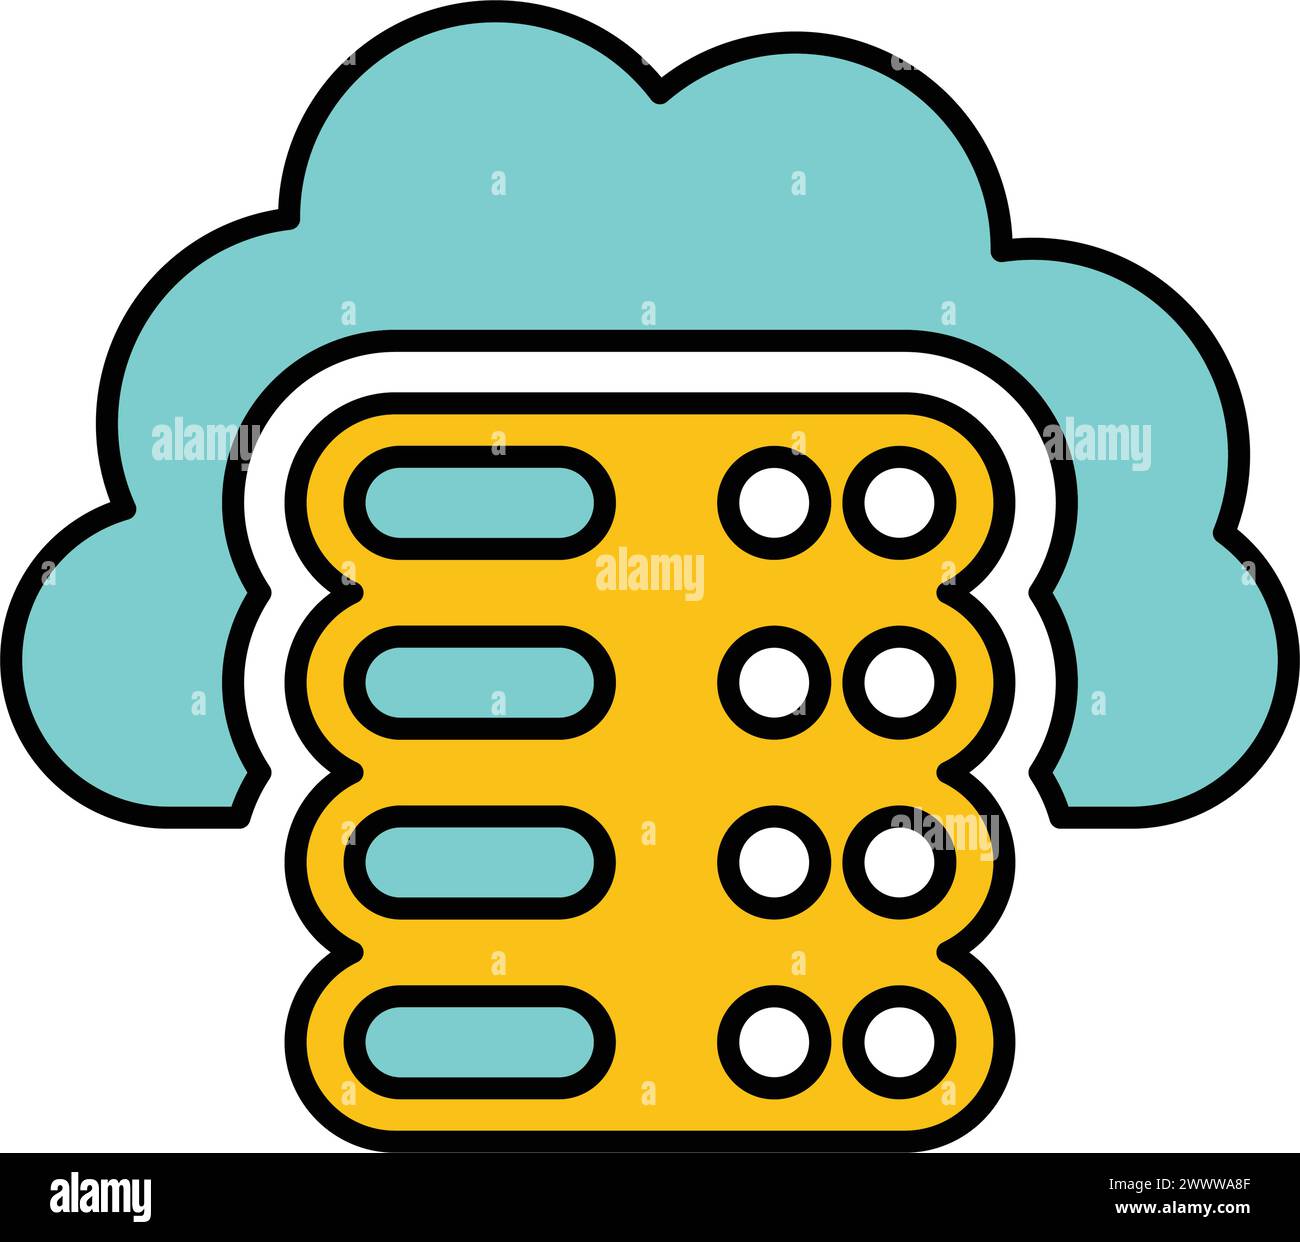 Cloud, server, storage icon - Beautiful vector design. Perfect use for web, print media, online design, commercial use or any kind of design project. Stock Vector